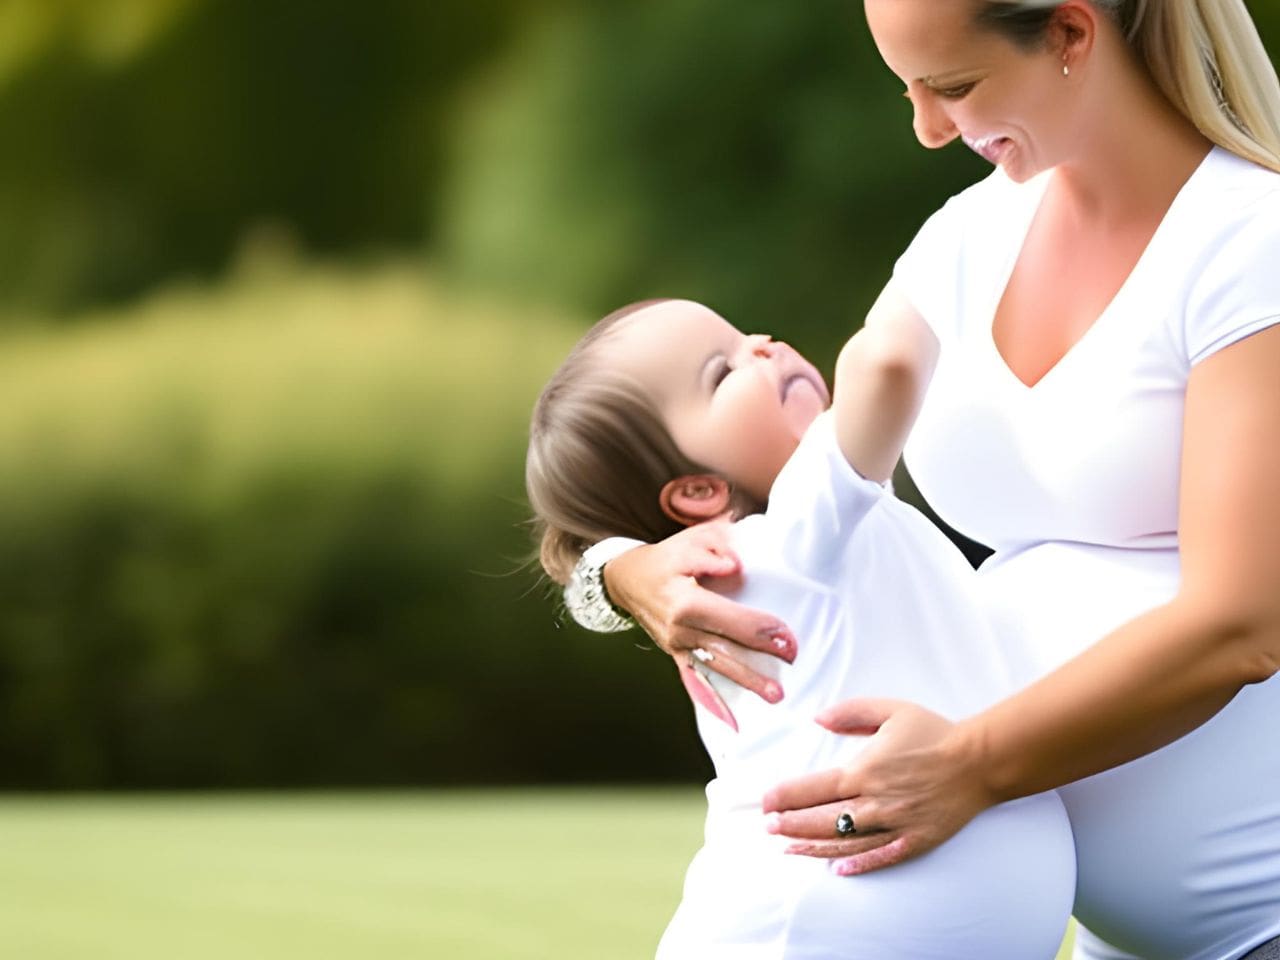 A pregnant woman hugs her child in a park while receiving osteopathic treatment.